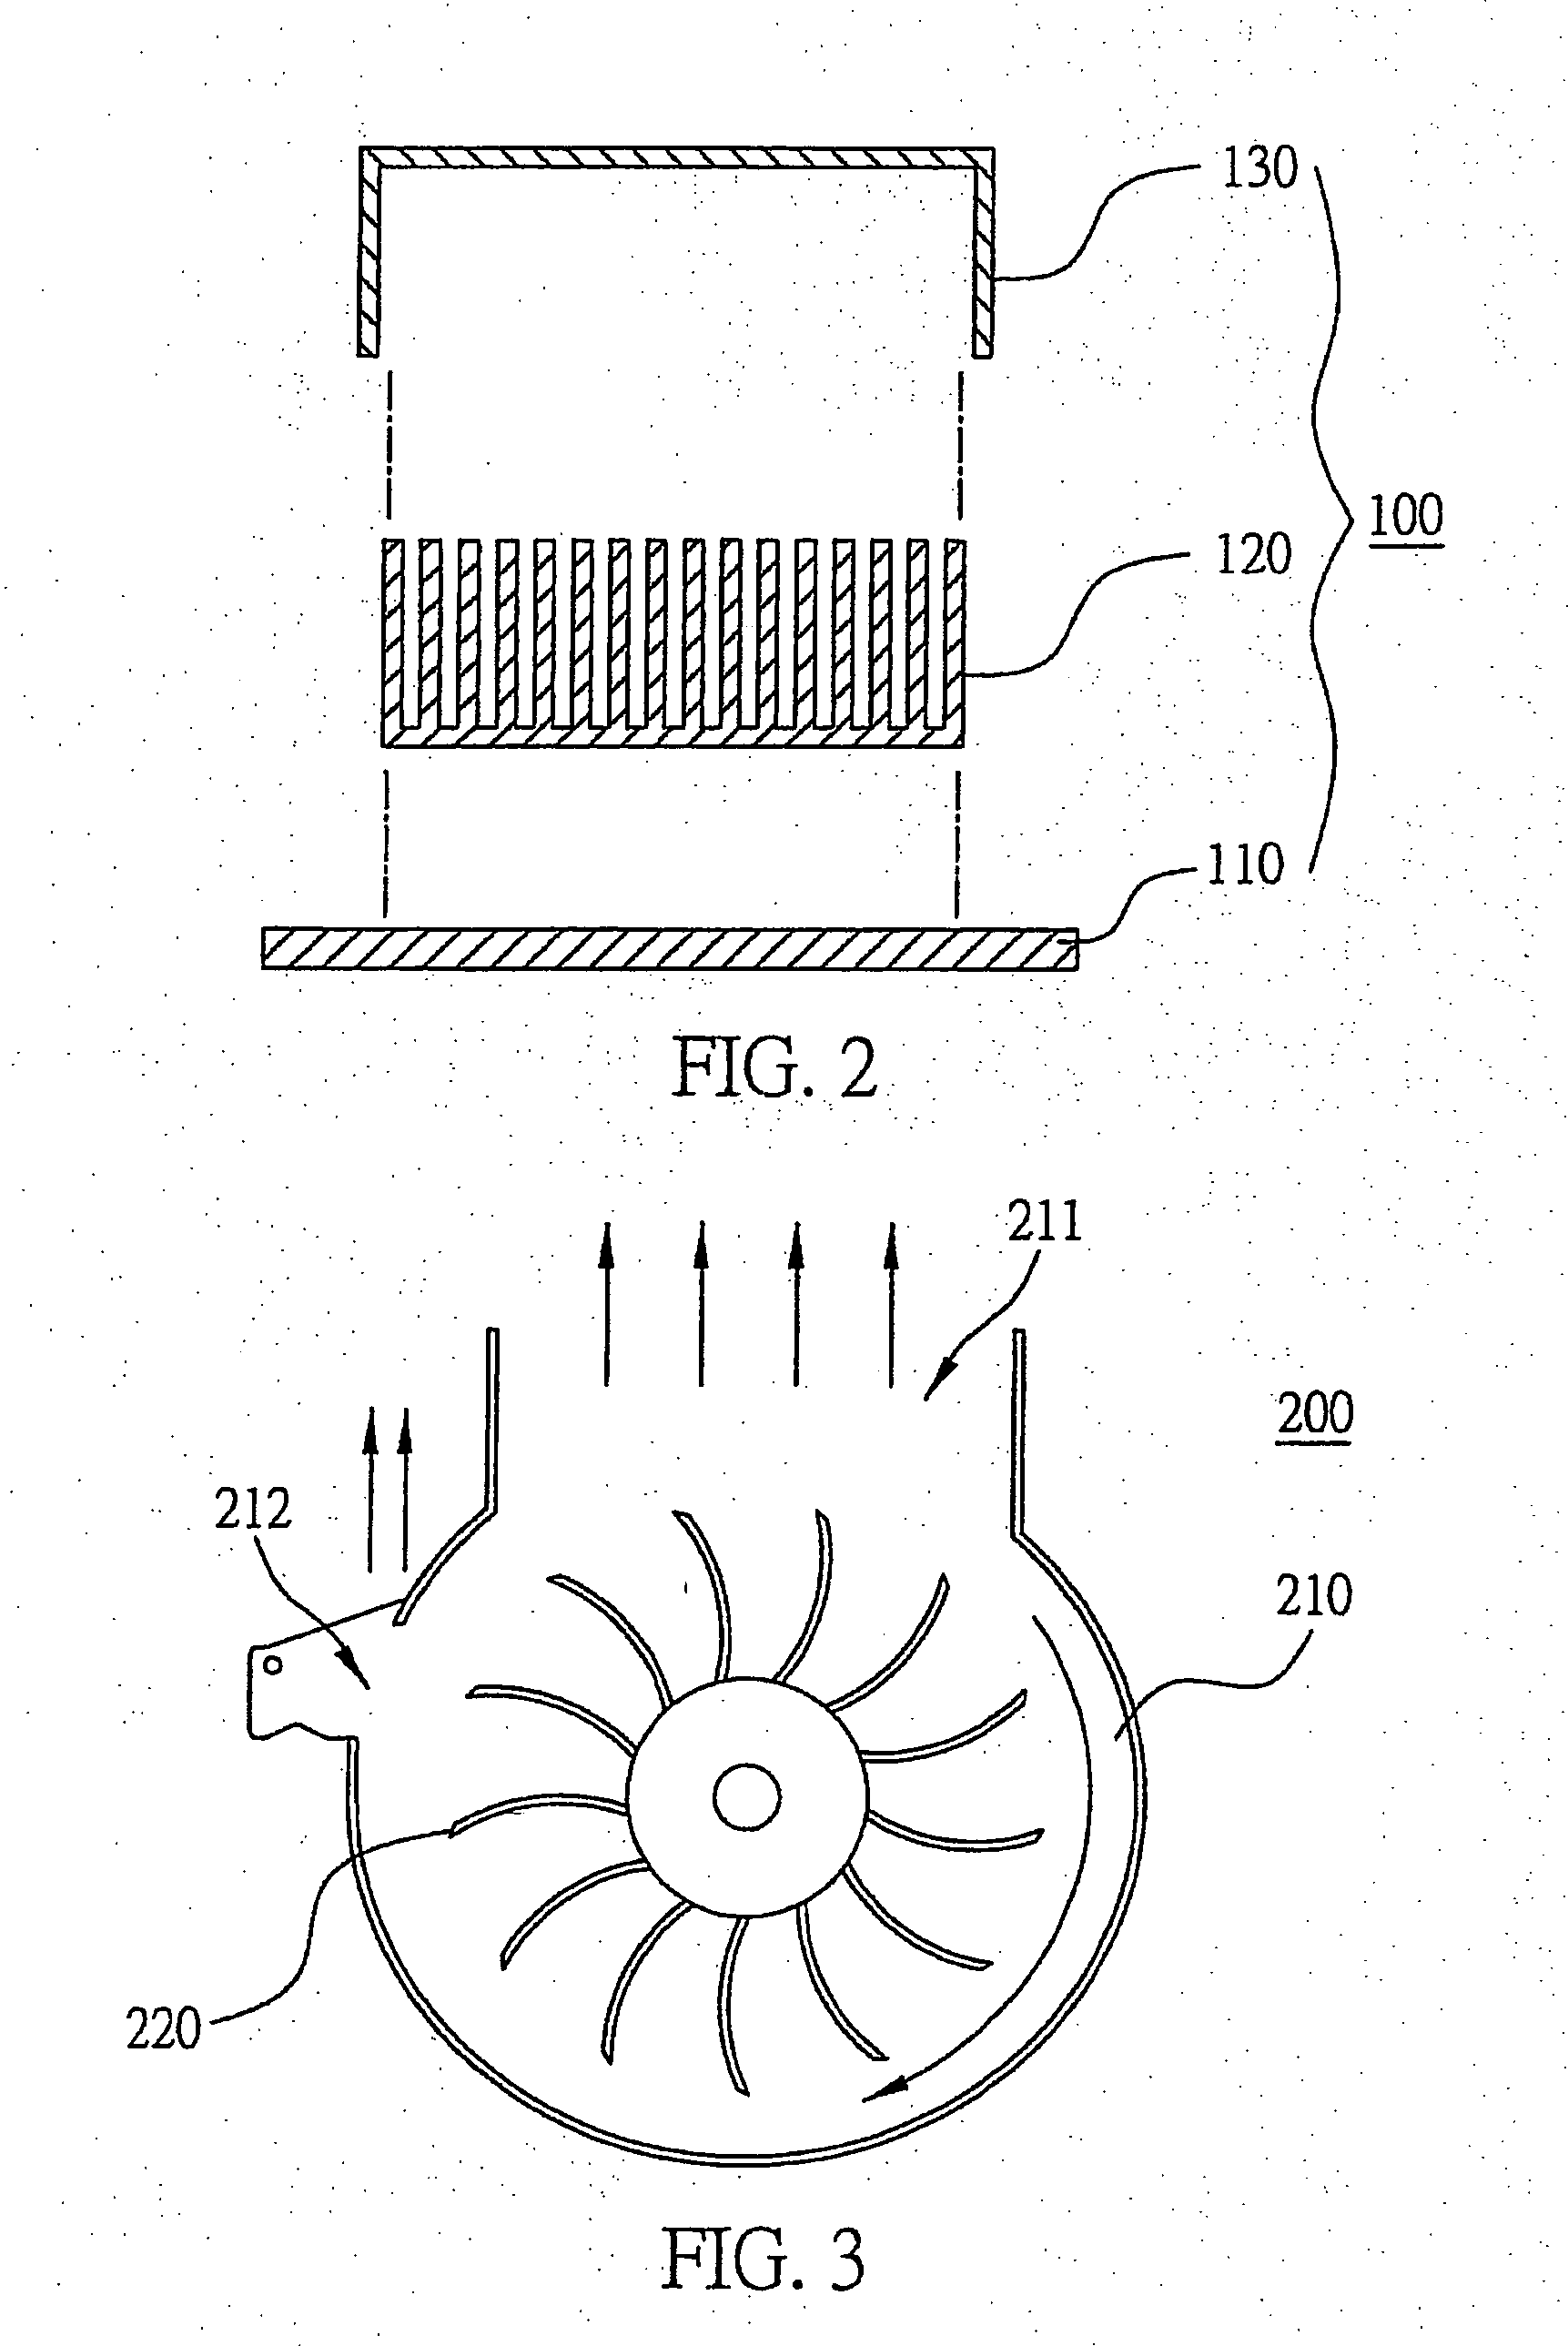 Fan-driven heat dissipating device with enhanced air blowing efficiency